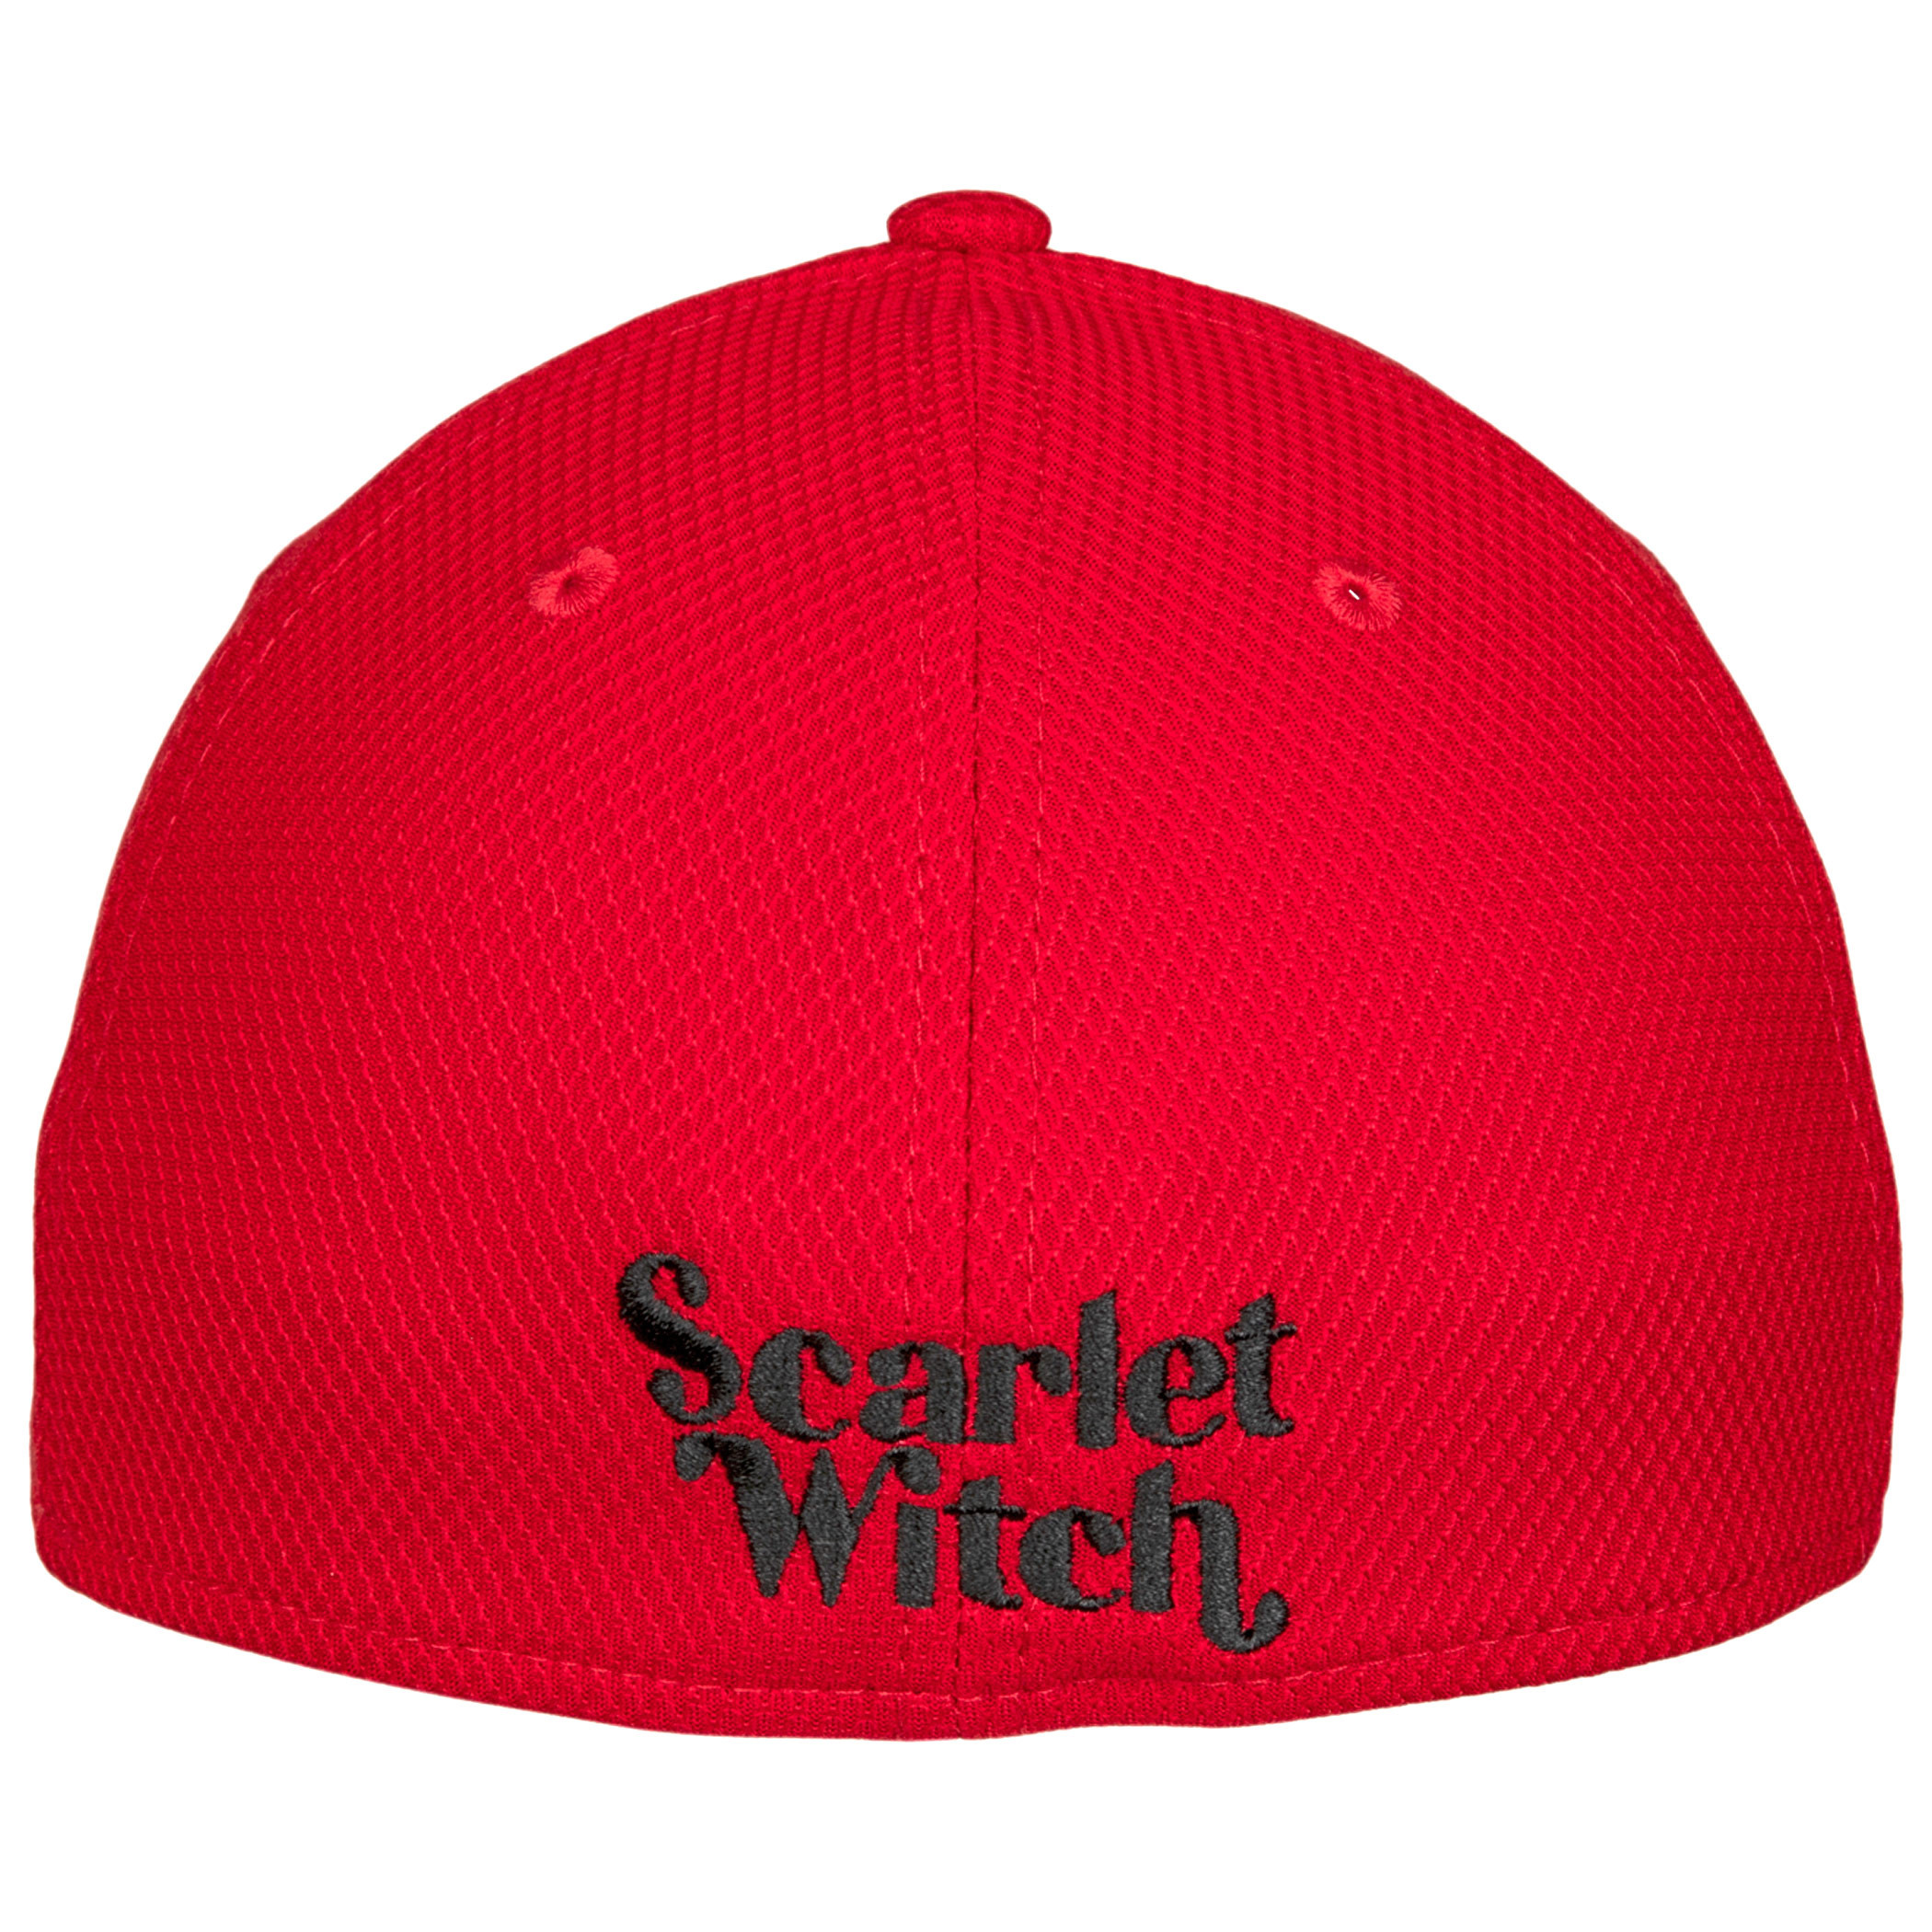 Scarlet Witch Symbol Diamond Tech New Era 39Thirty Fitted Hat